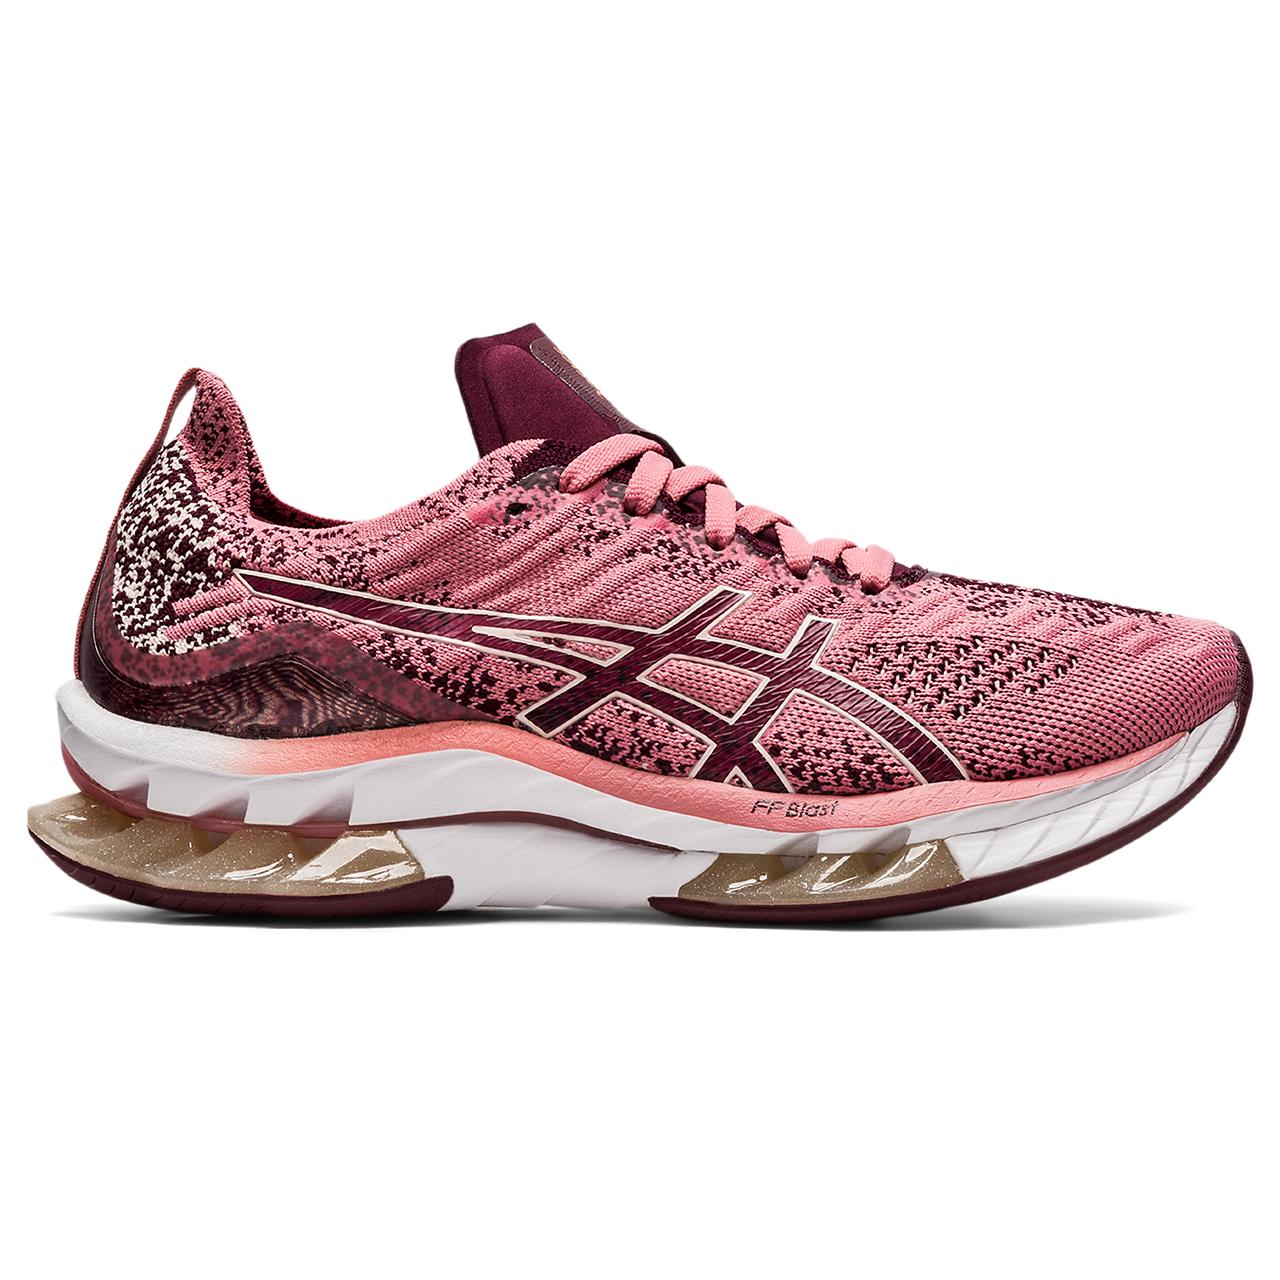 The Women's ASICS Kinsei is back and we are excited!  Years ago this was one of our best selling styles.  The Women's Kinsei Blast is designed for runners seeking a cushioned and smooth shoe.  The Gel in the heel and forefoot creates lots of cushioning during the landing phase- the shoe then propels you forward into that smooth transition.  ASICS also added a Pebax plate to the midsole that makes for fast transitions and lots of forward momentum. This product is in the color Smokey Rose/Deep Mars.